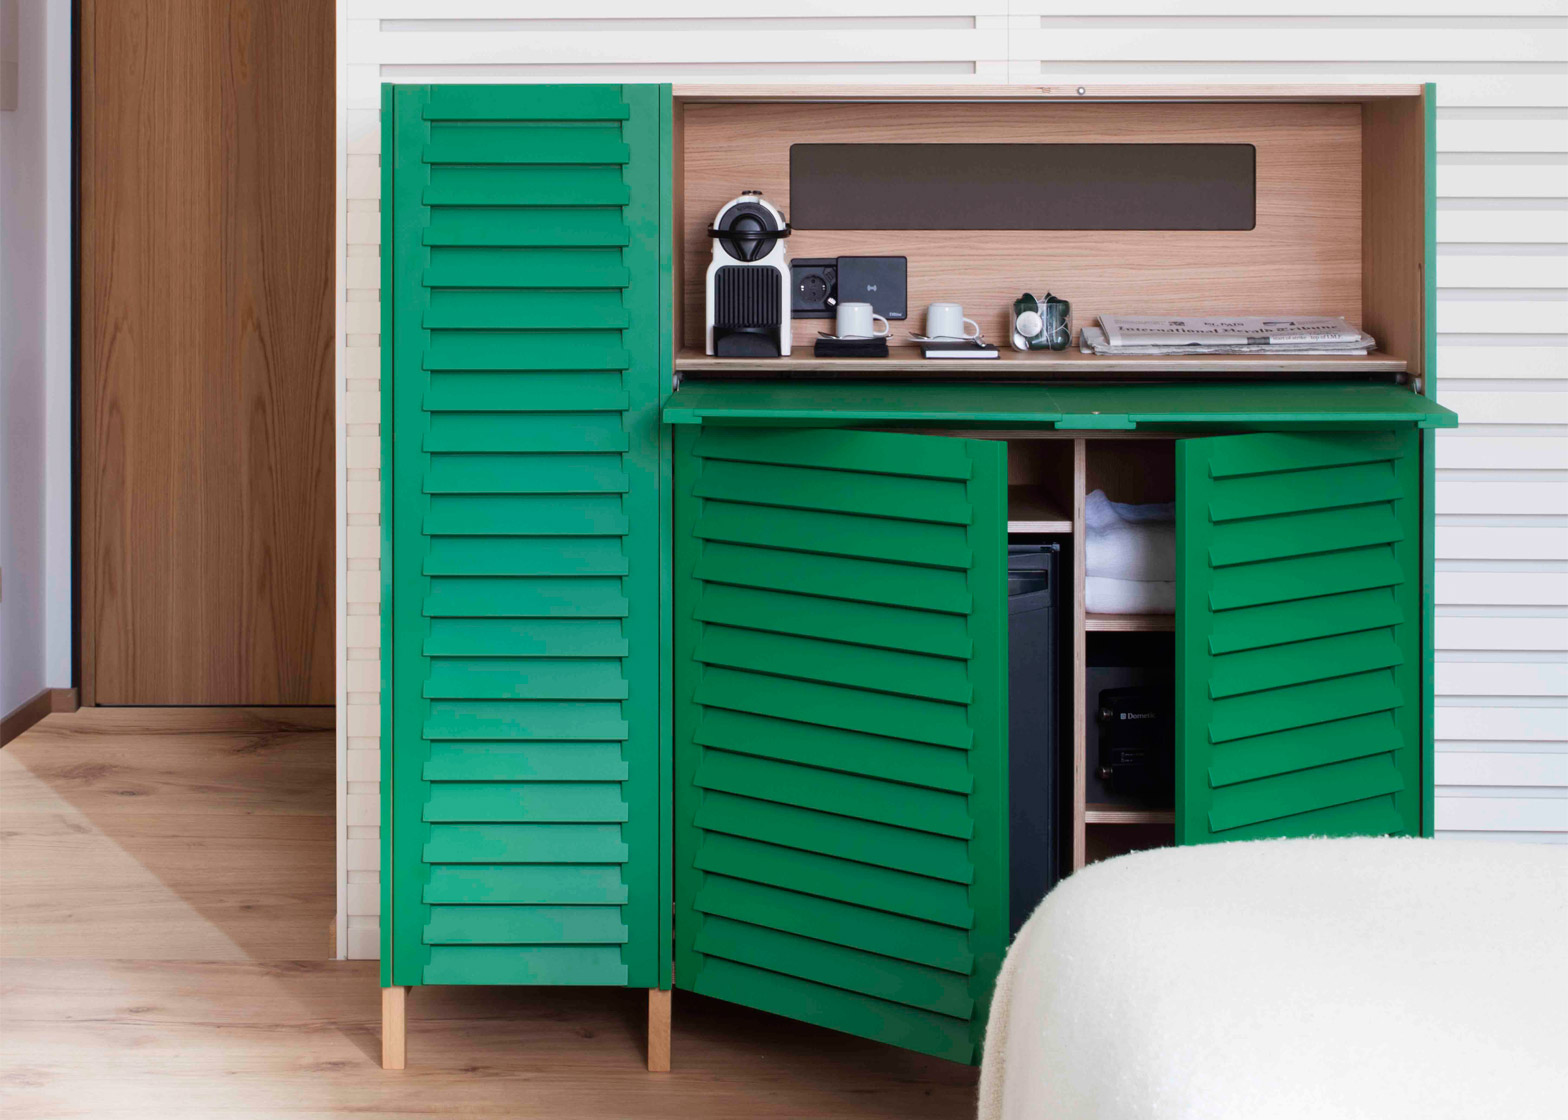 Papila Overhauls Hotel Drinks Cabinets With Nature Collection